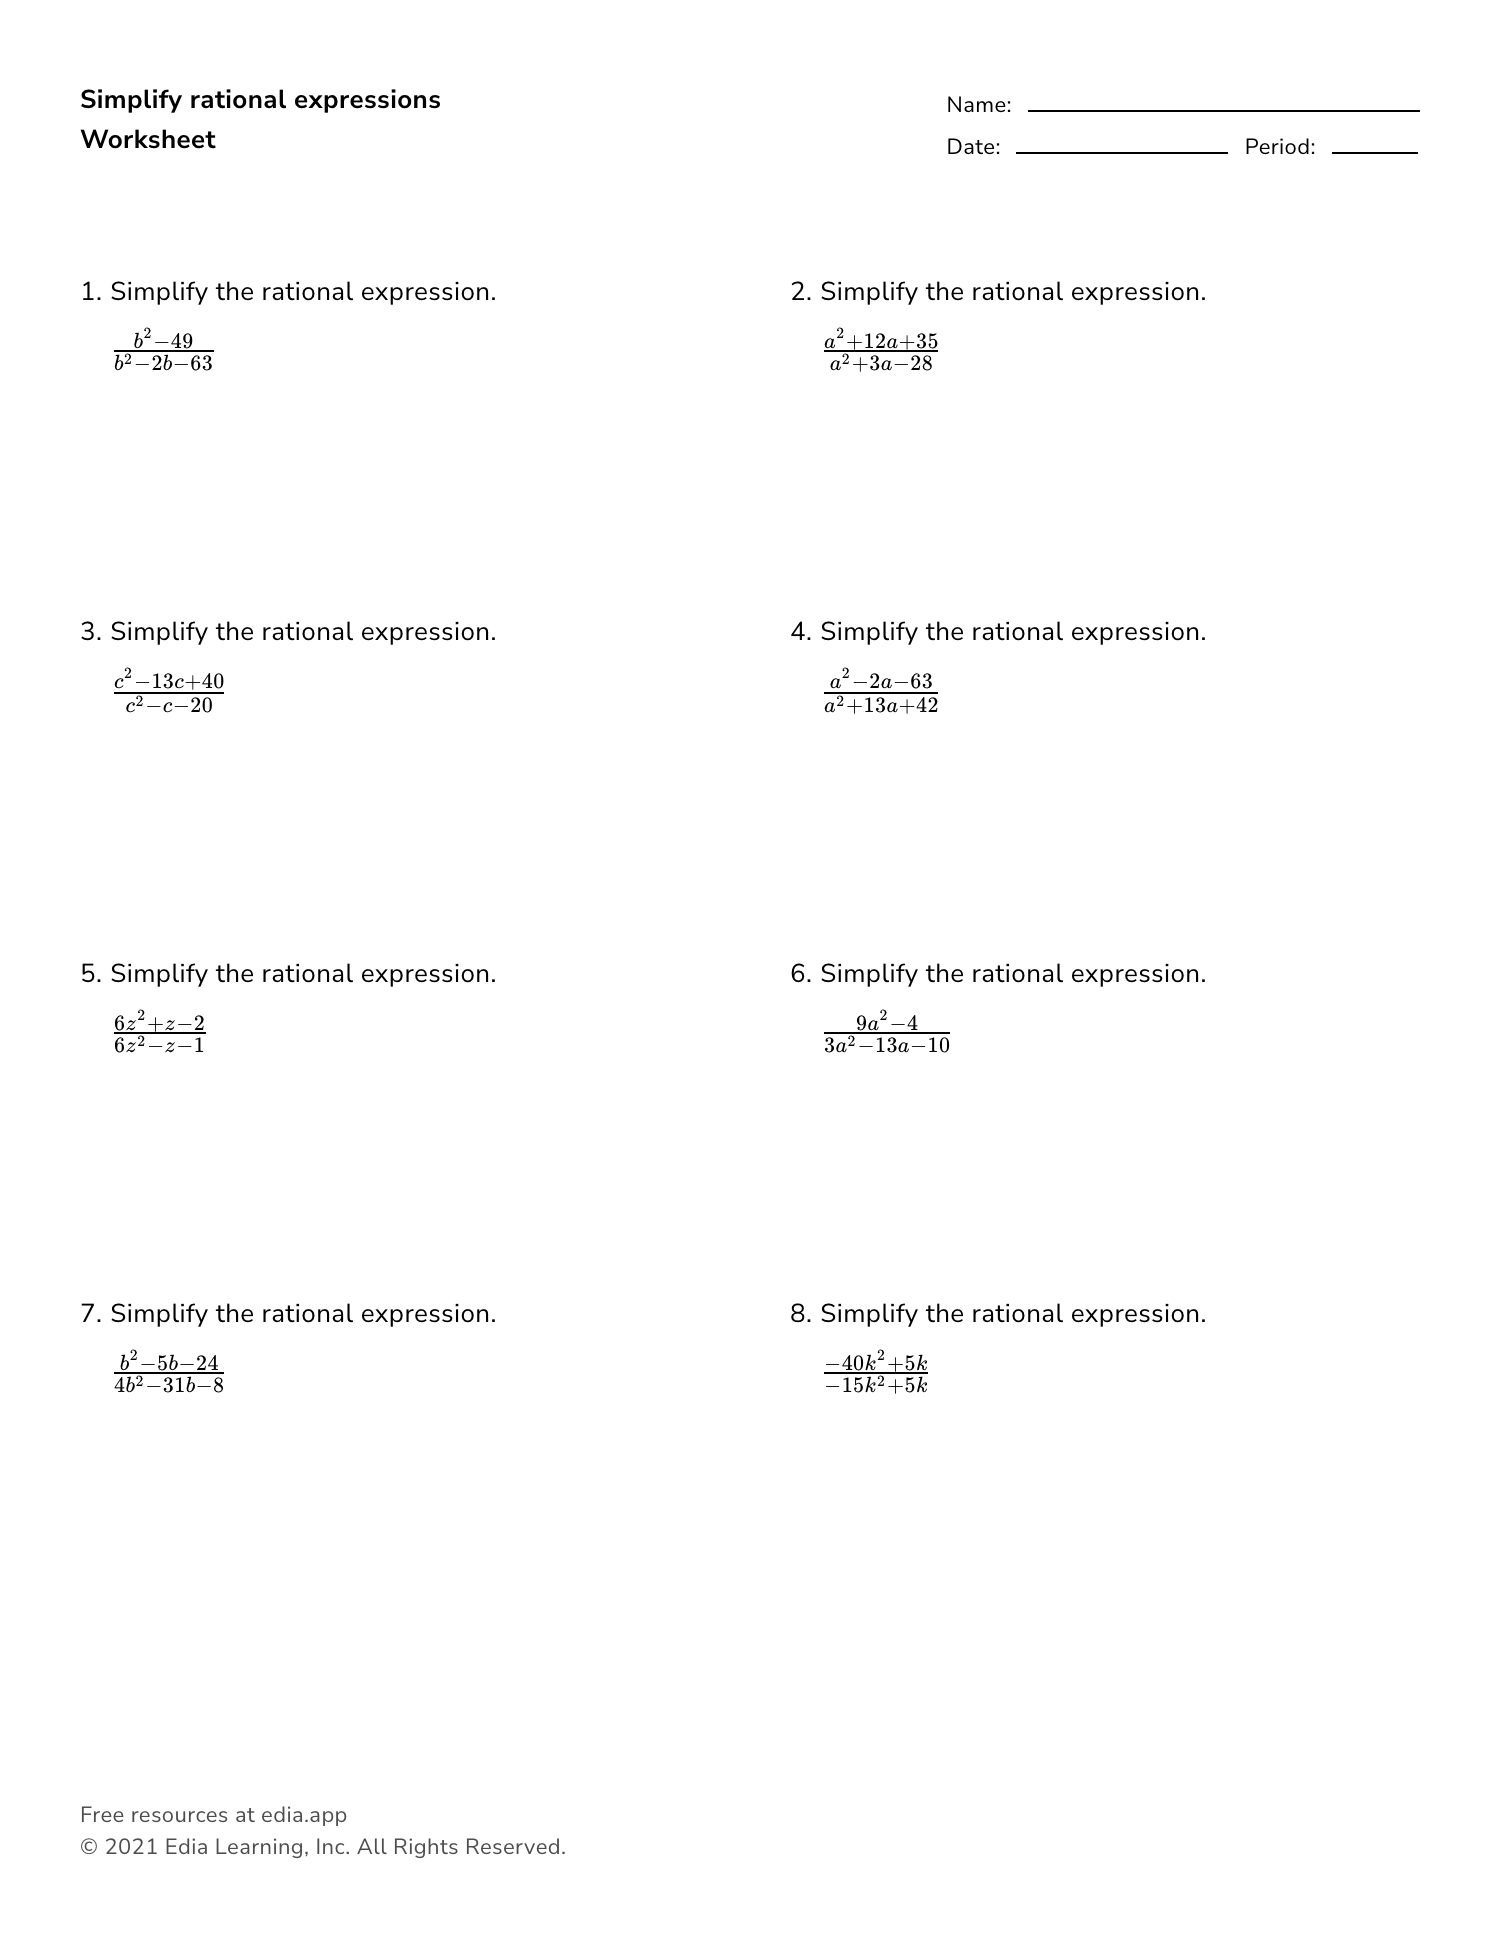 Simplify Rational Expressions - Worksheet With Regard To Simplify Rational Expressions Worksheet